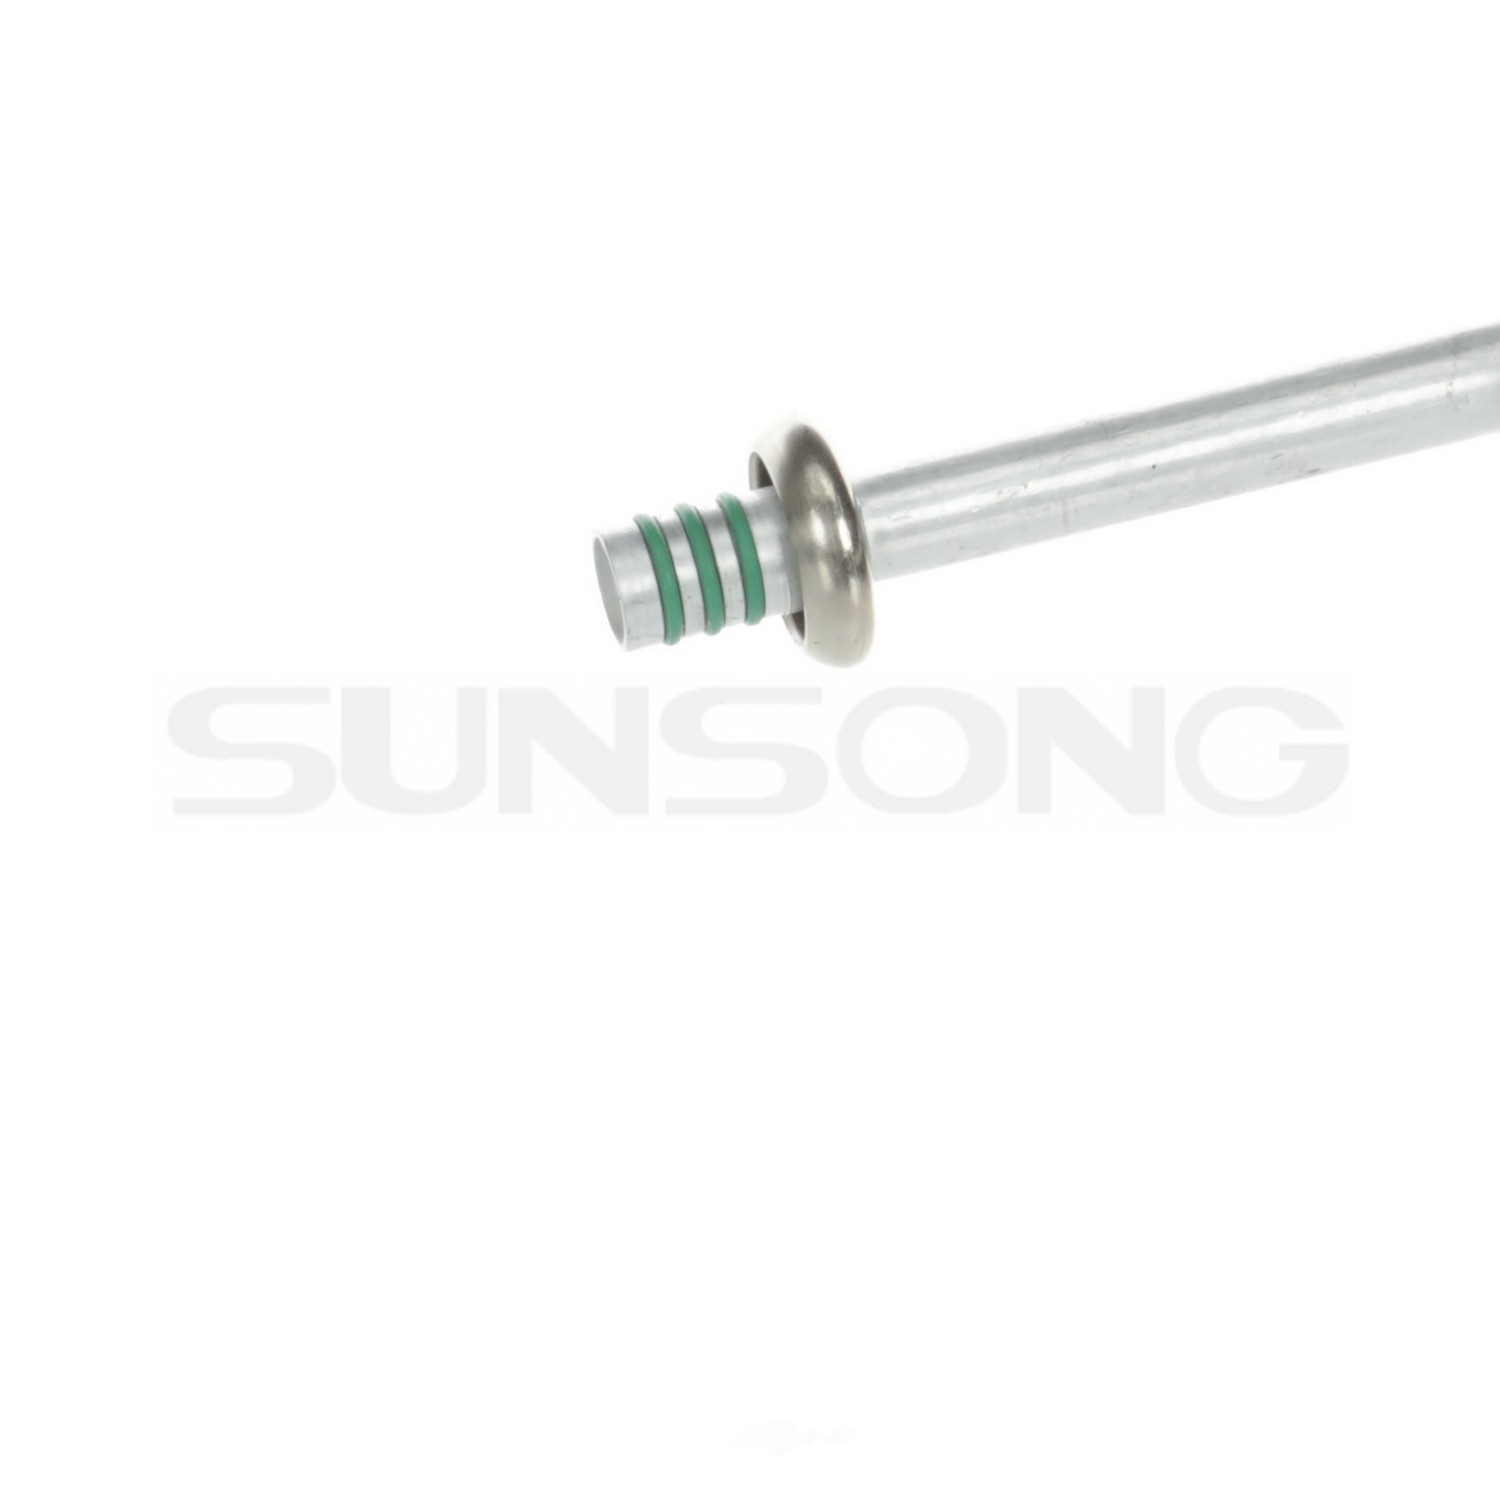 SUNSONG NORTH AMERICA - A/C Refrigerant Discharge / Suction Hose Assembly - SUG 5203004